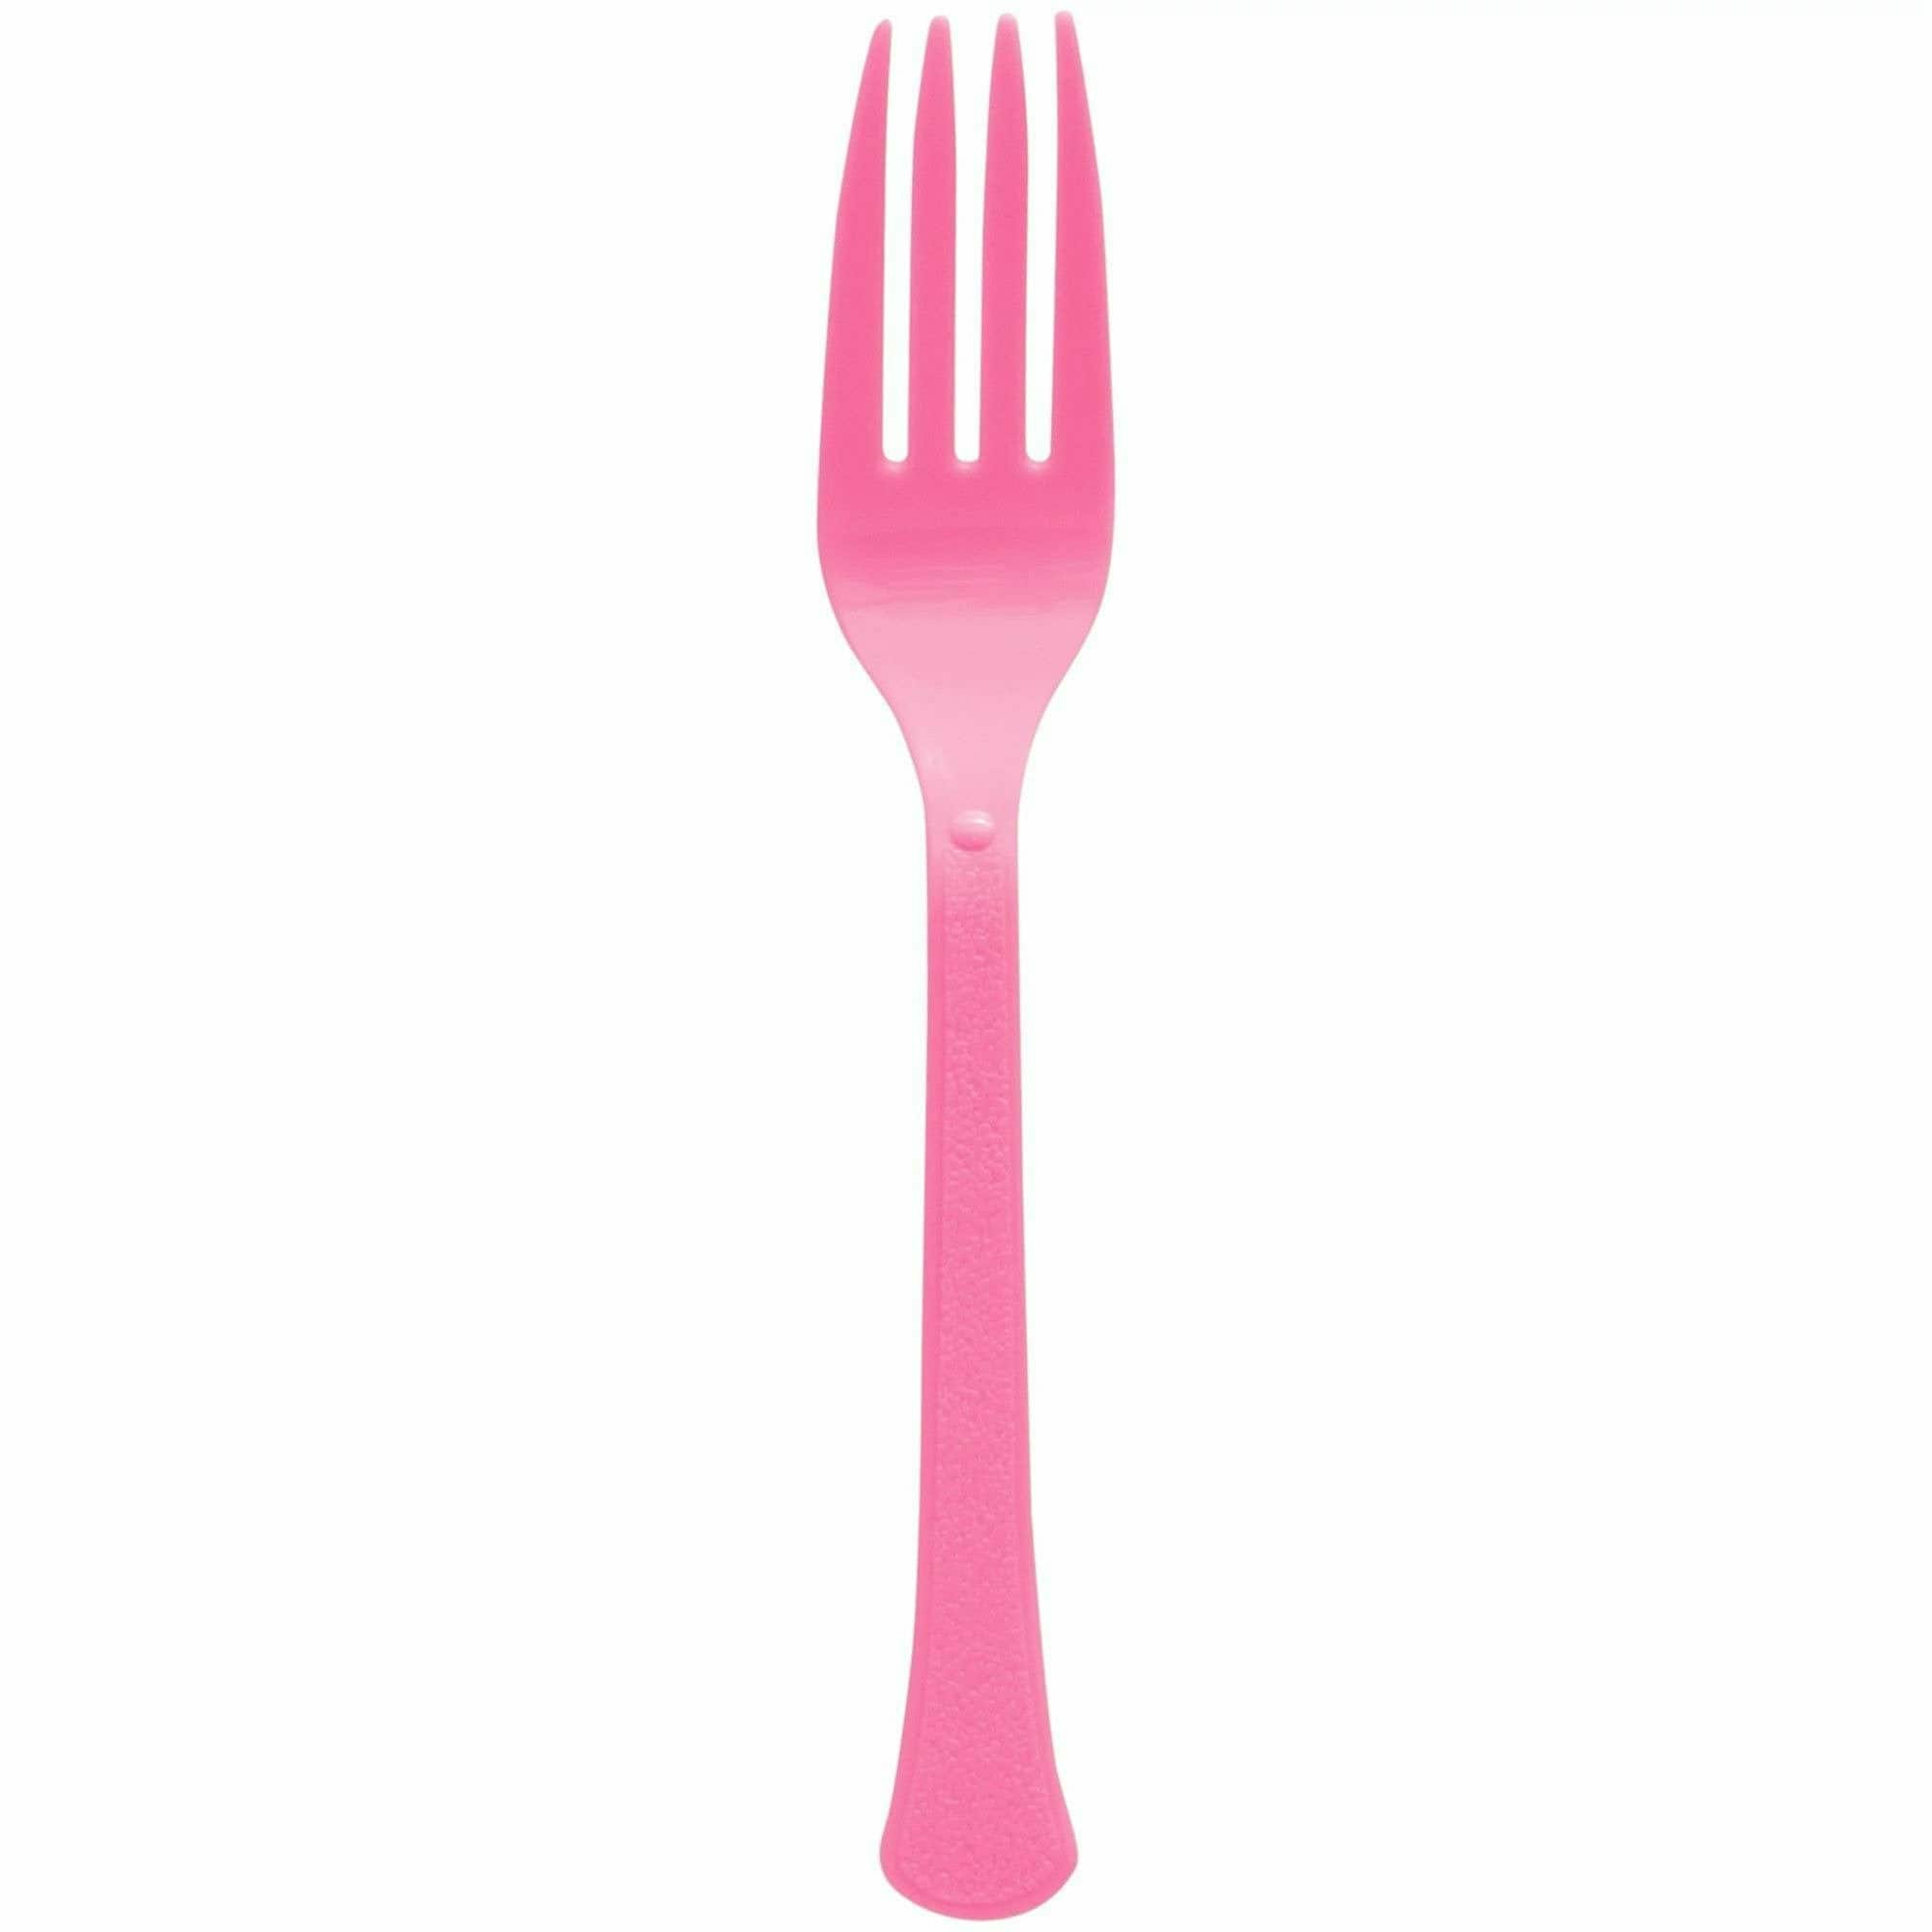 Amscan BASIC Bright Pink - Boxed, Heavy Weight Forks, High Ct.